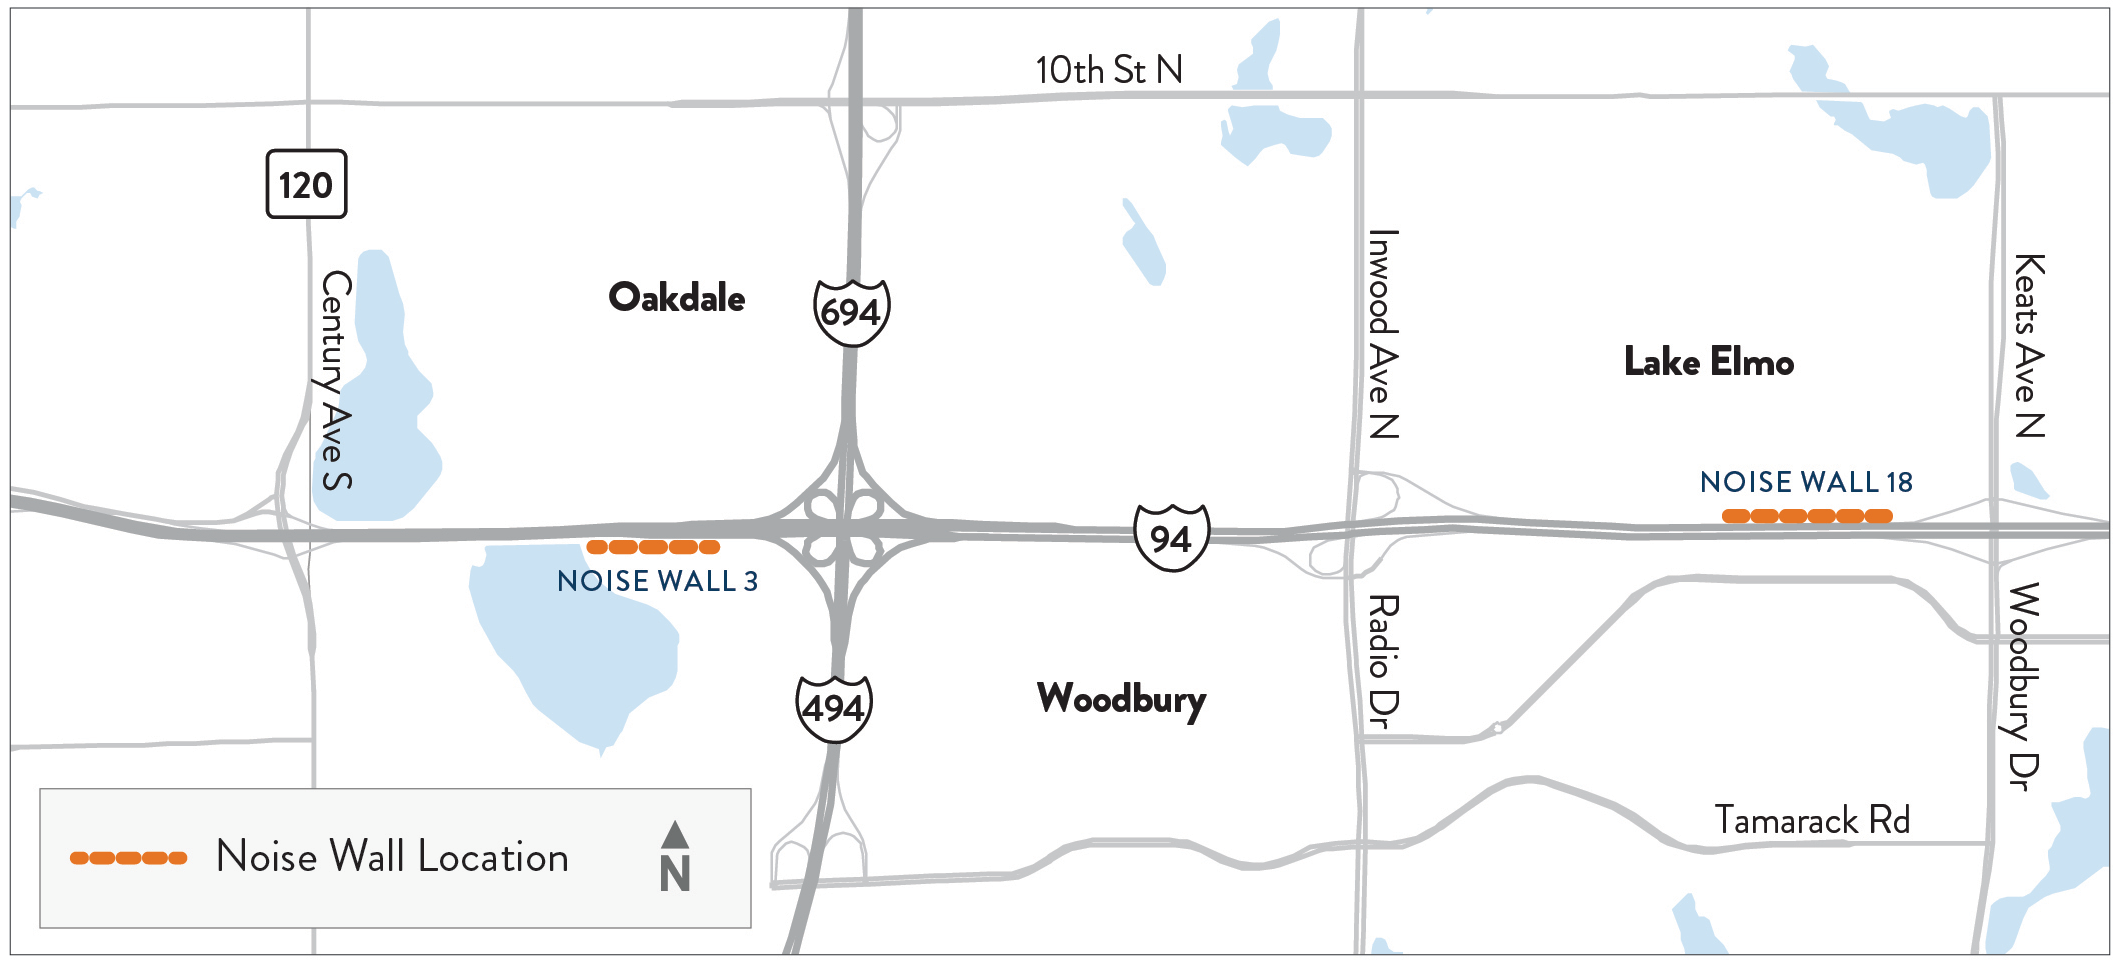 Locations of proposed noise walls in the I-94 Oakdale to Lakeland project area